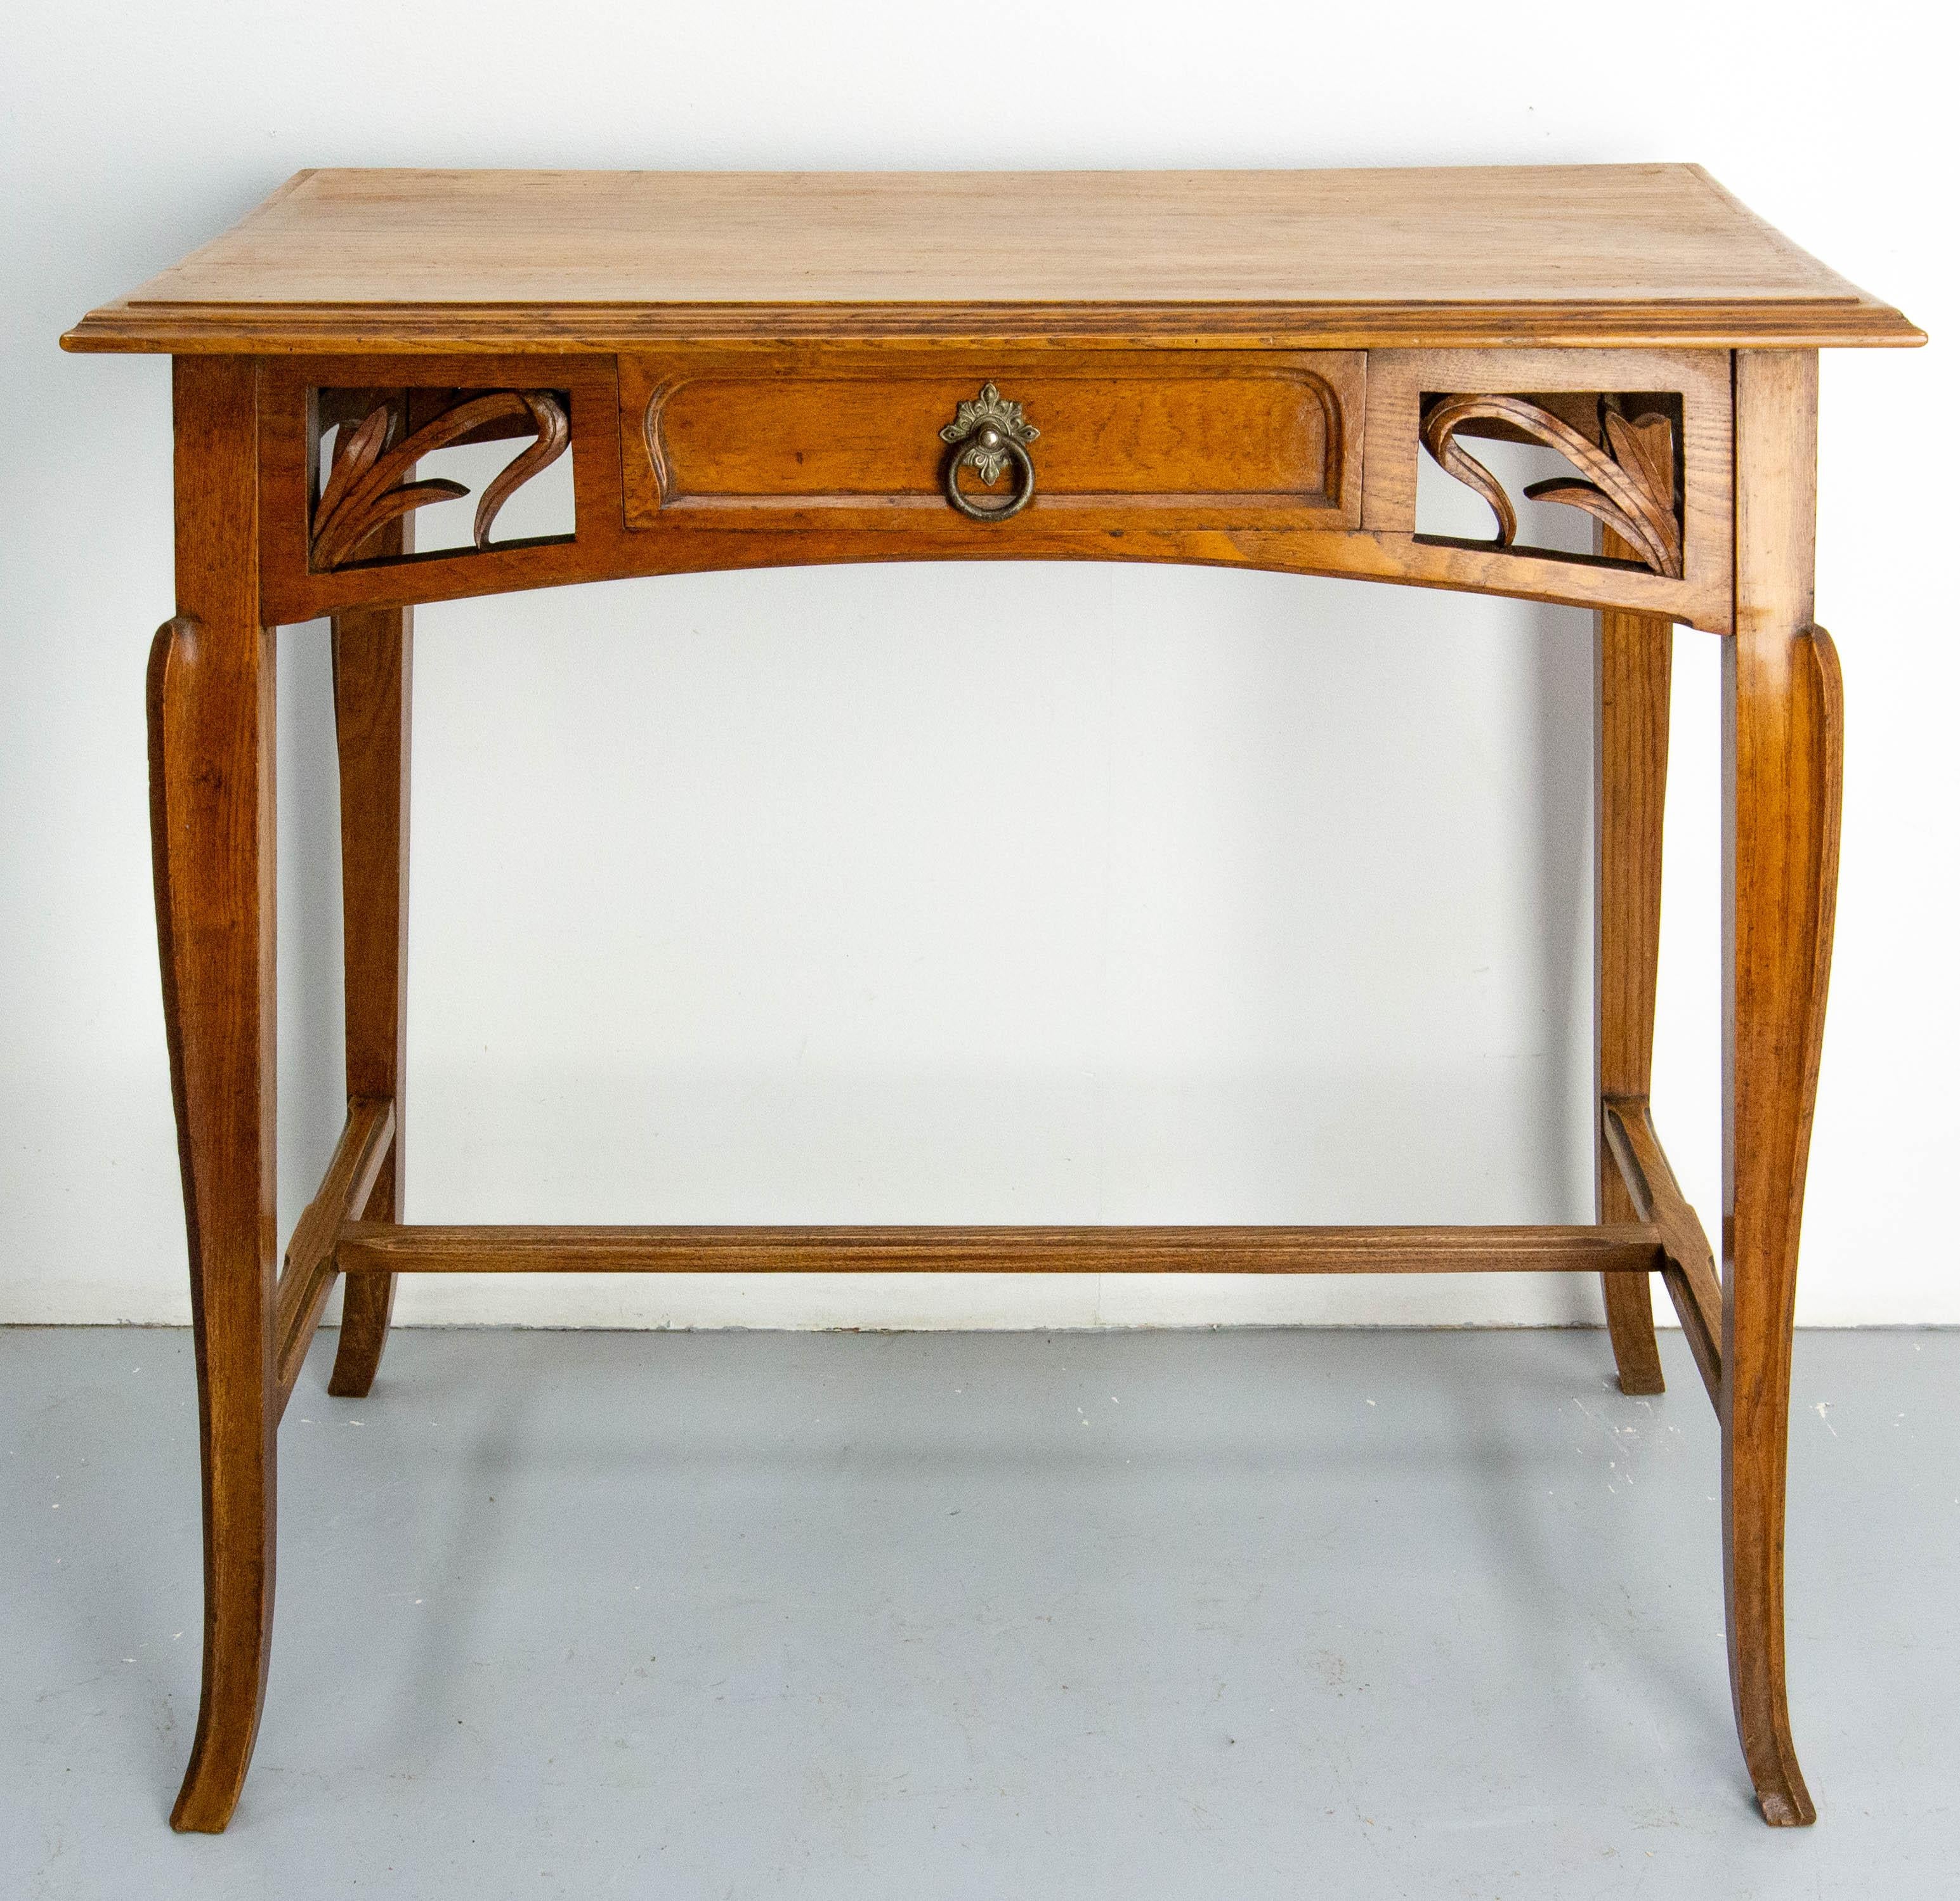 French antique oak side or writing table, circa 1900.
Made in the art Nouveau period : the carving of the drawer and of the table belt is typical of the lines of this artistic movement inspirated by nature
A small detail has been glued by our